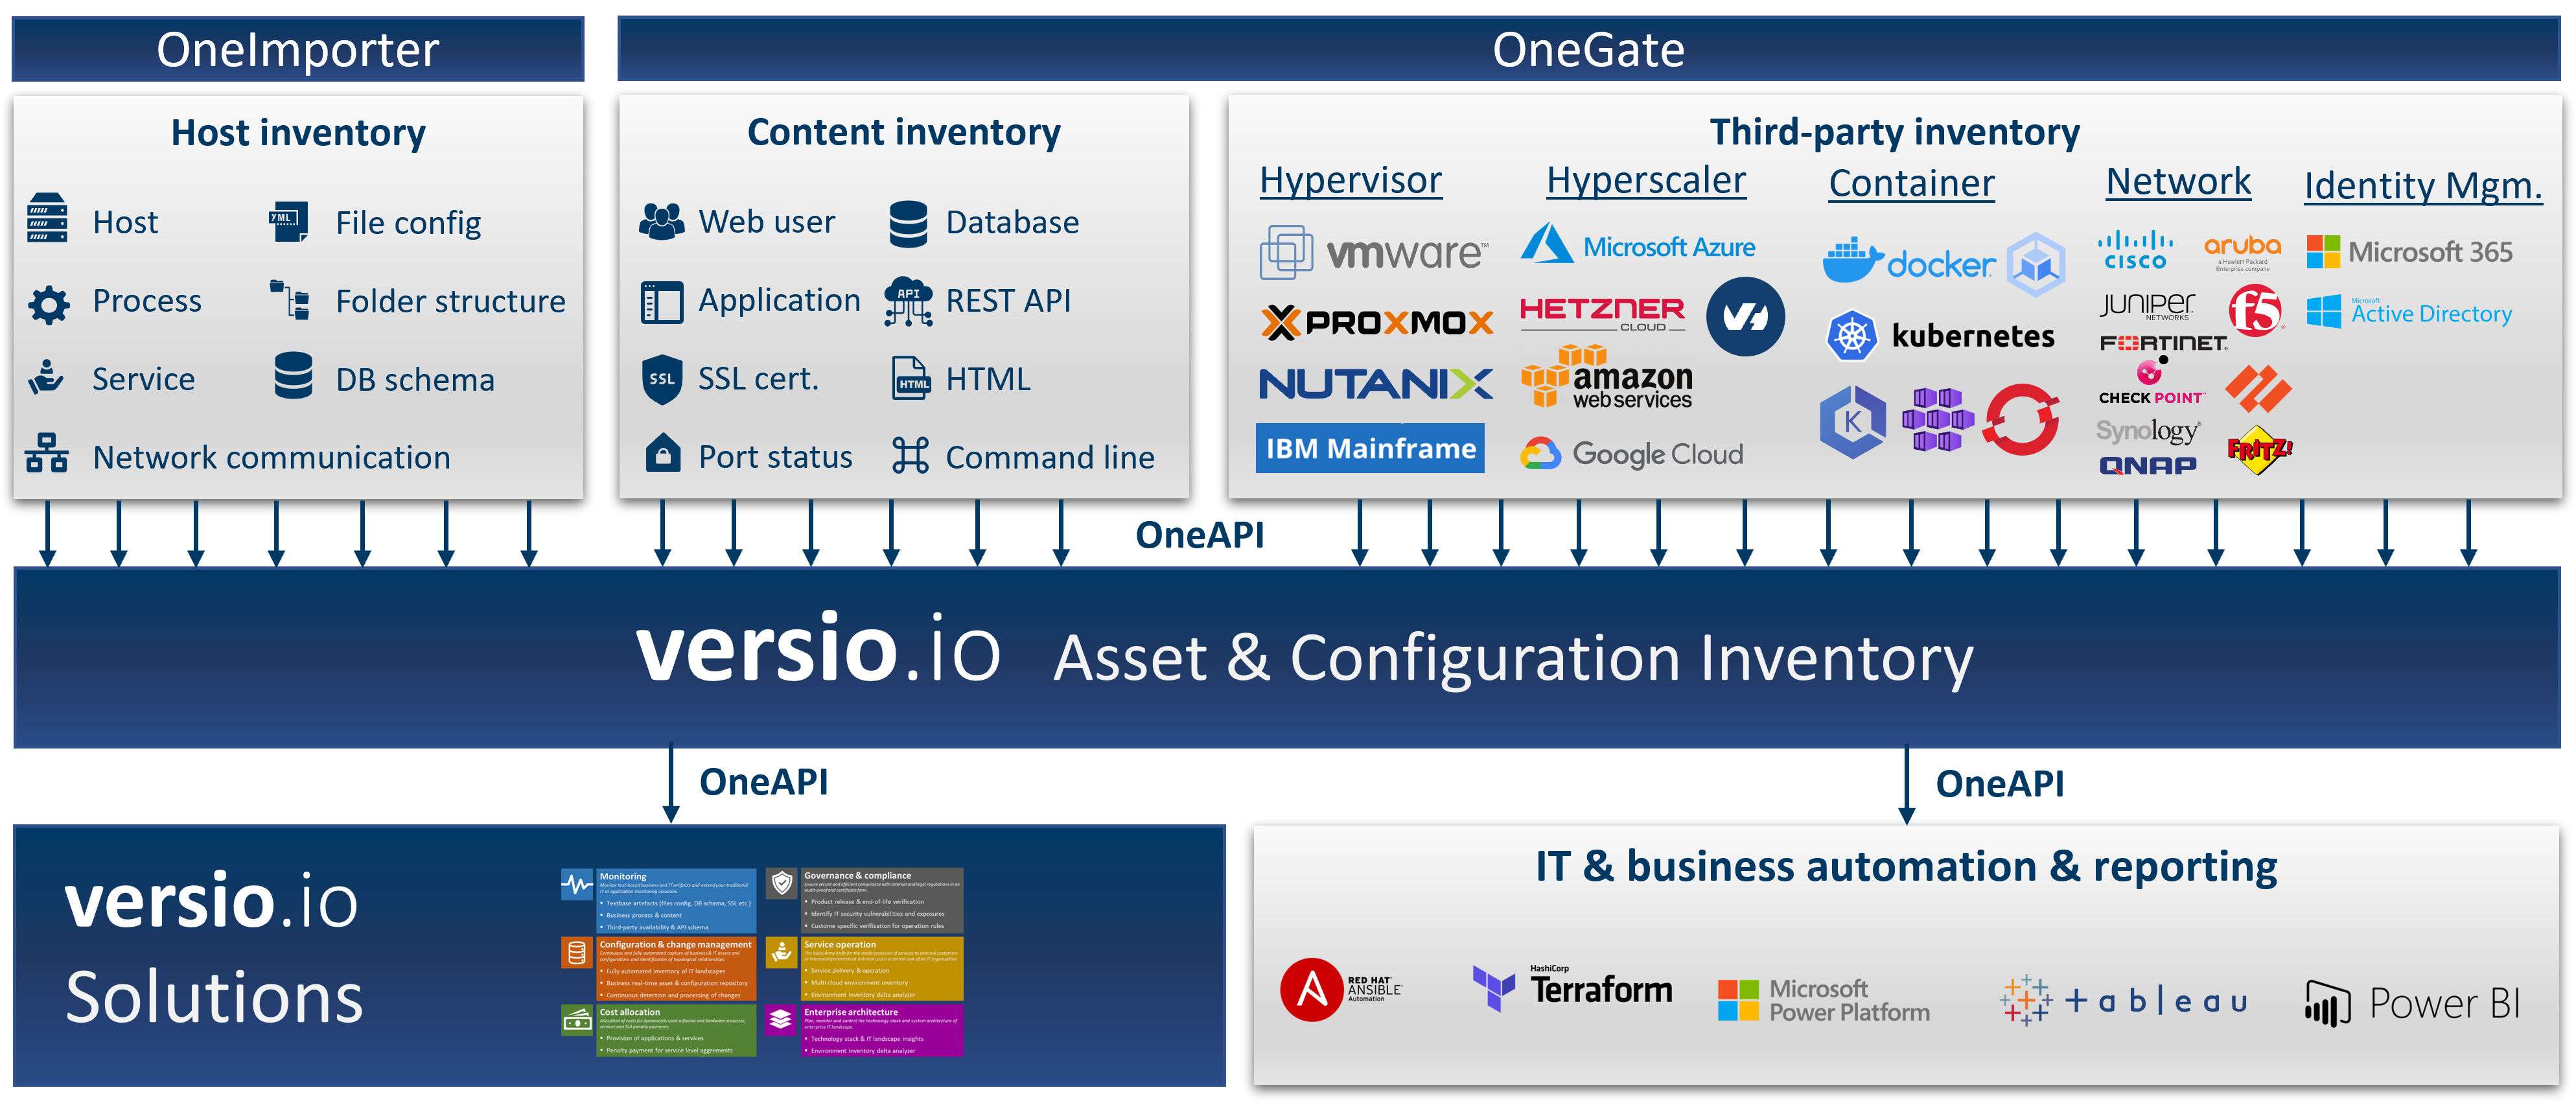 Fully automated and continuous full-stack inventory in business real time